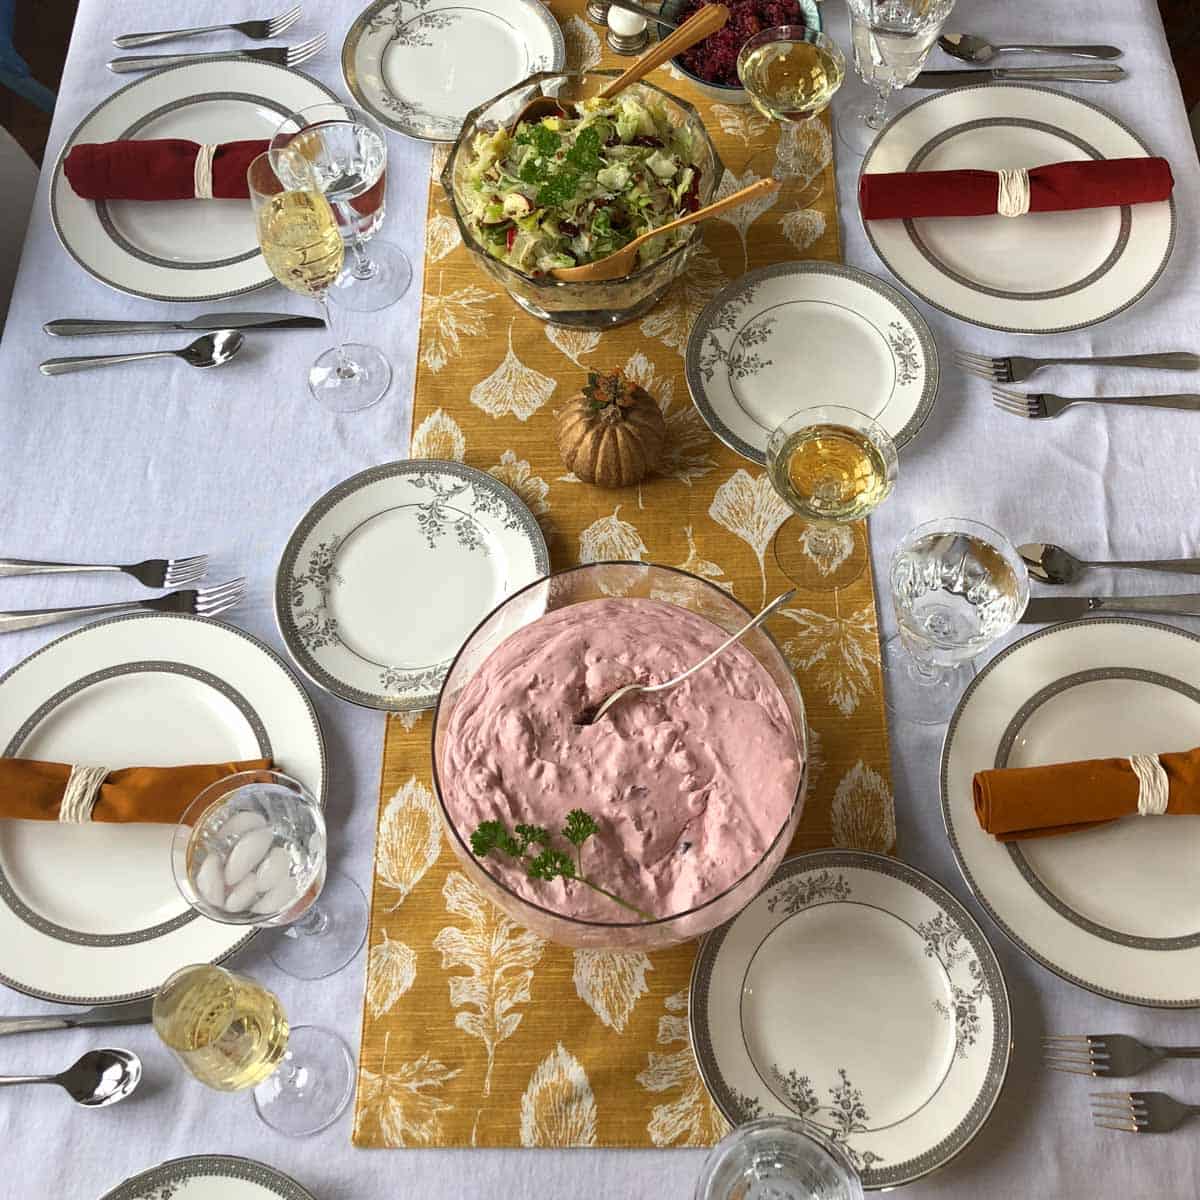 dinner table with a gold table runner, a pink jello salad in a bowl, plates, and orange napkins.